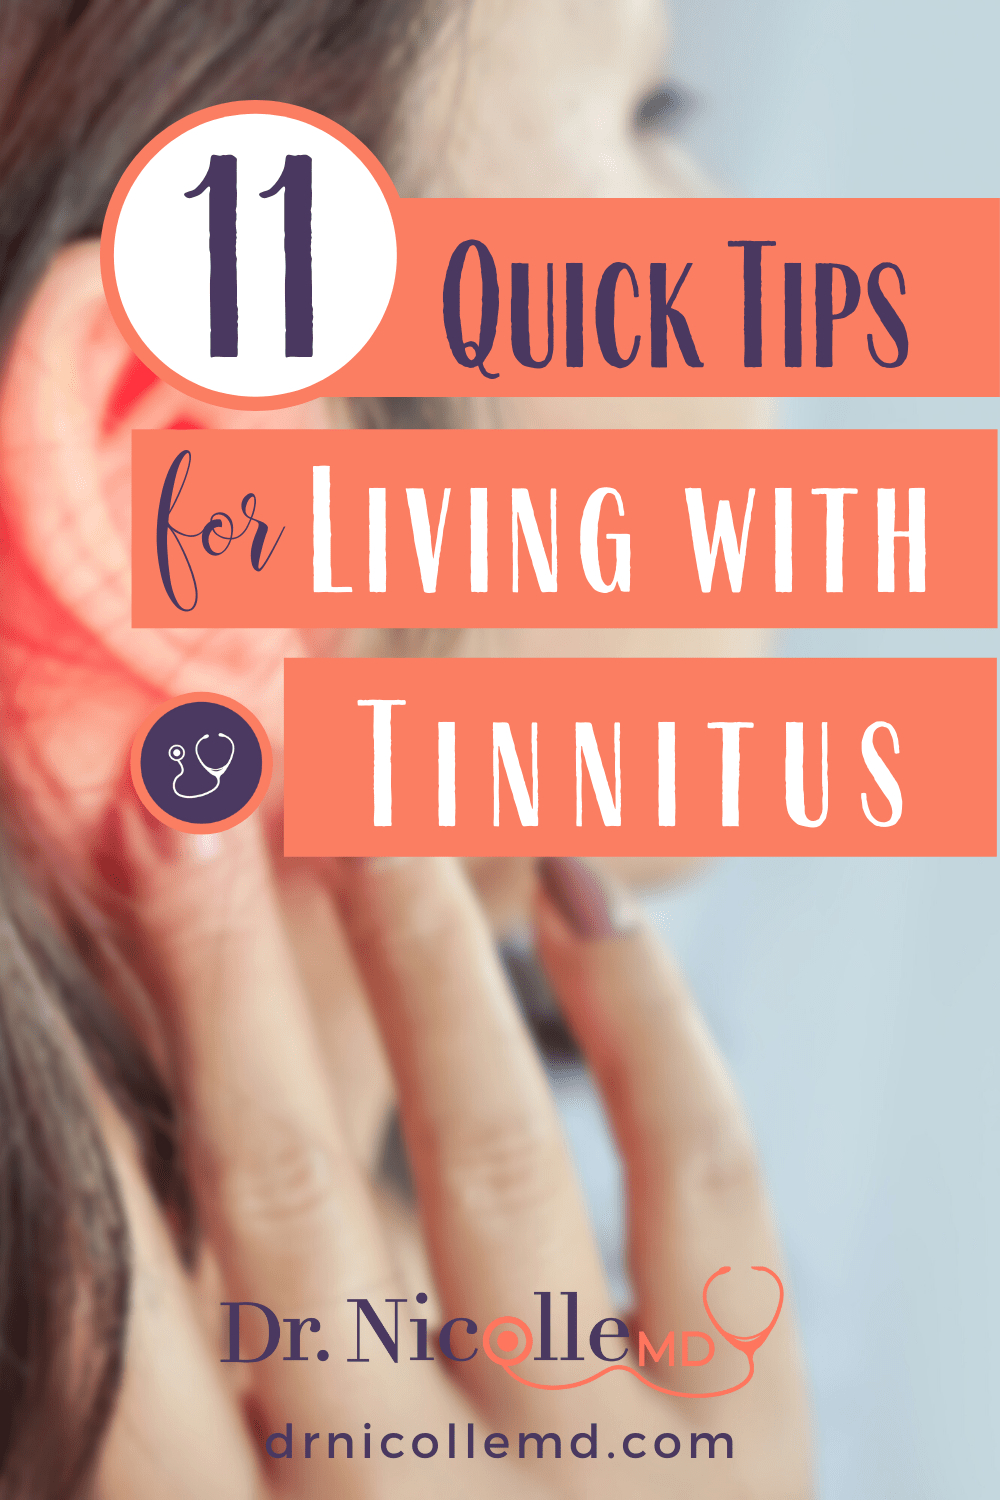 11 Quick Tips for Living with Tinnitus